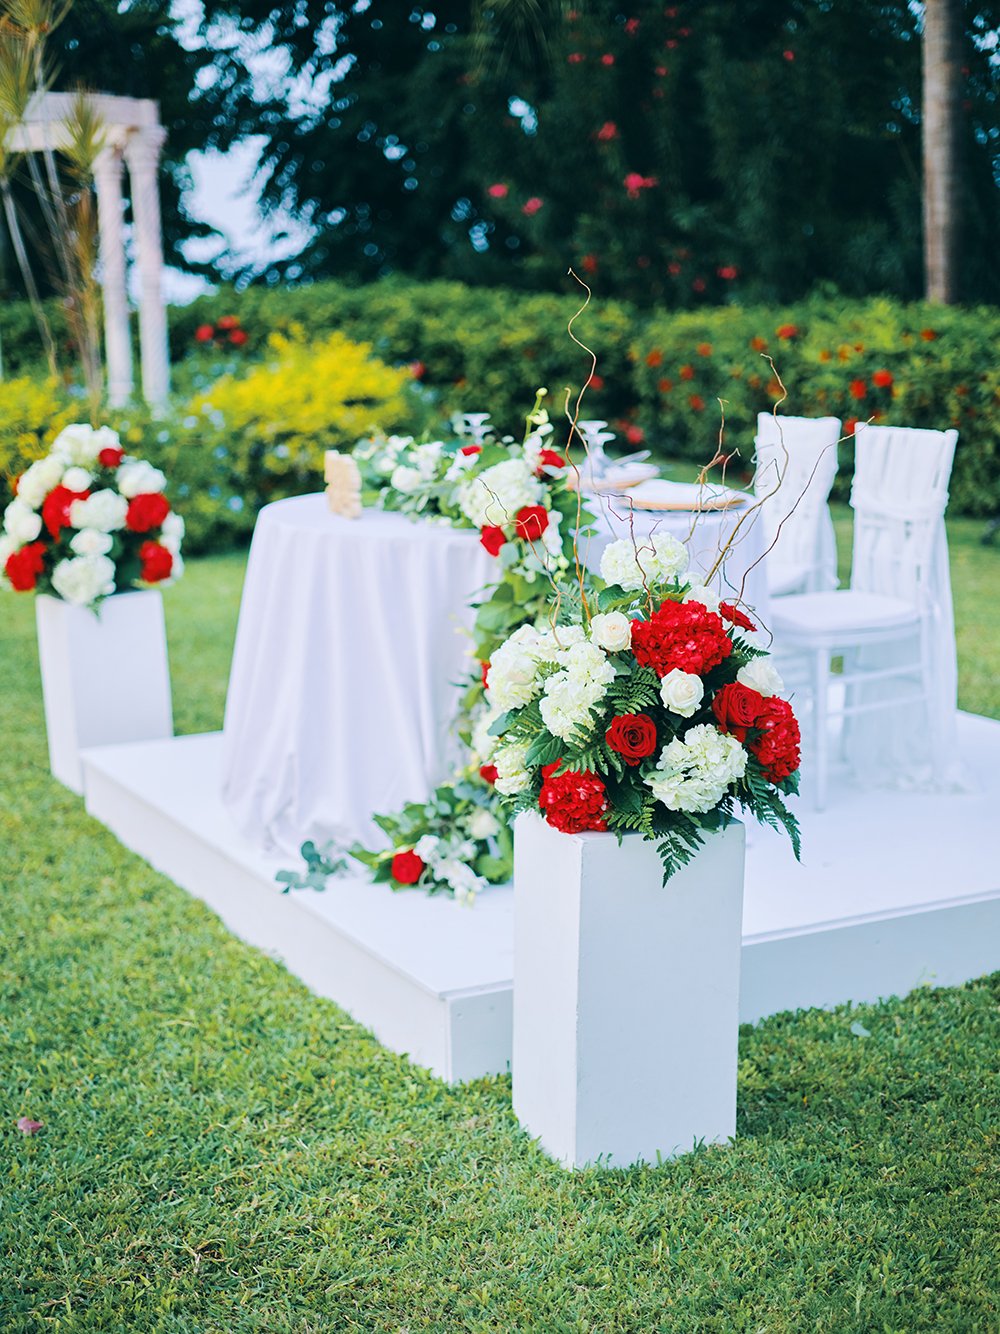 his her table - wedding reception decor - outside